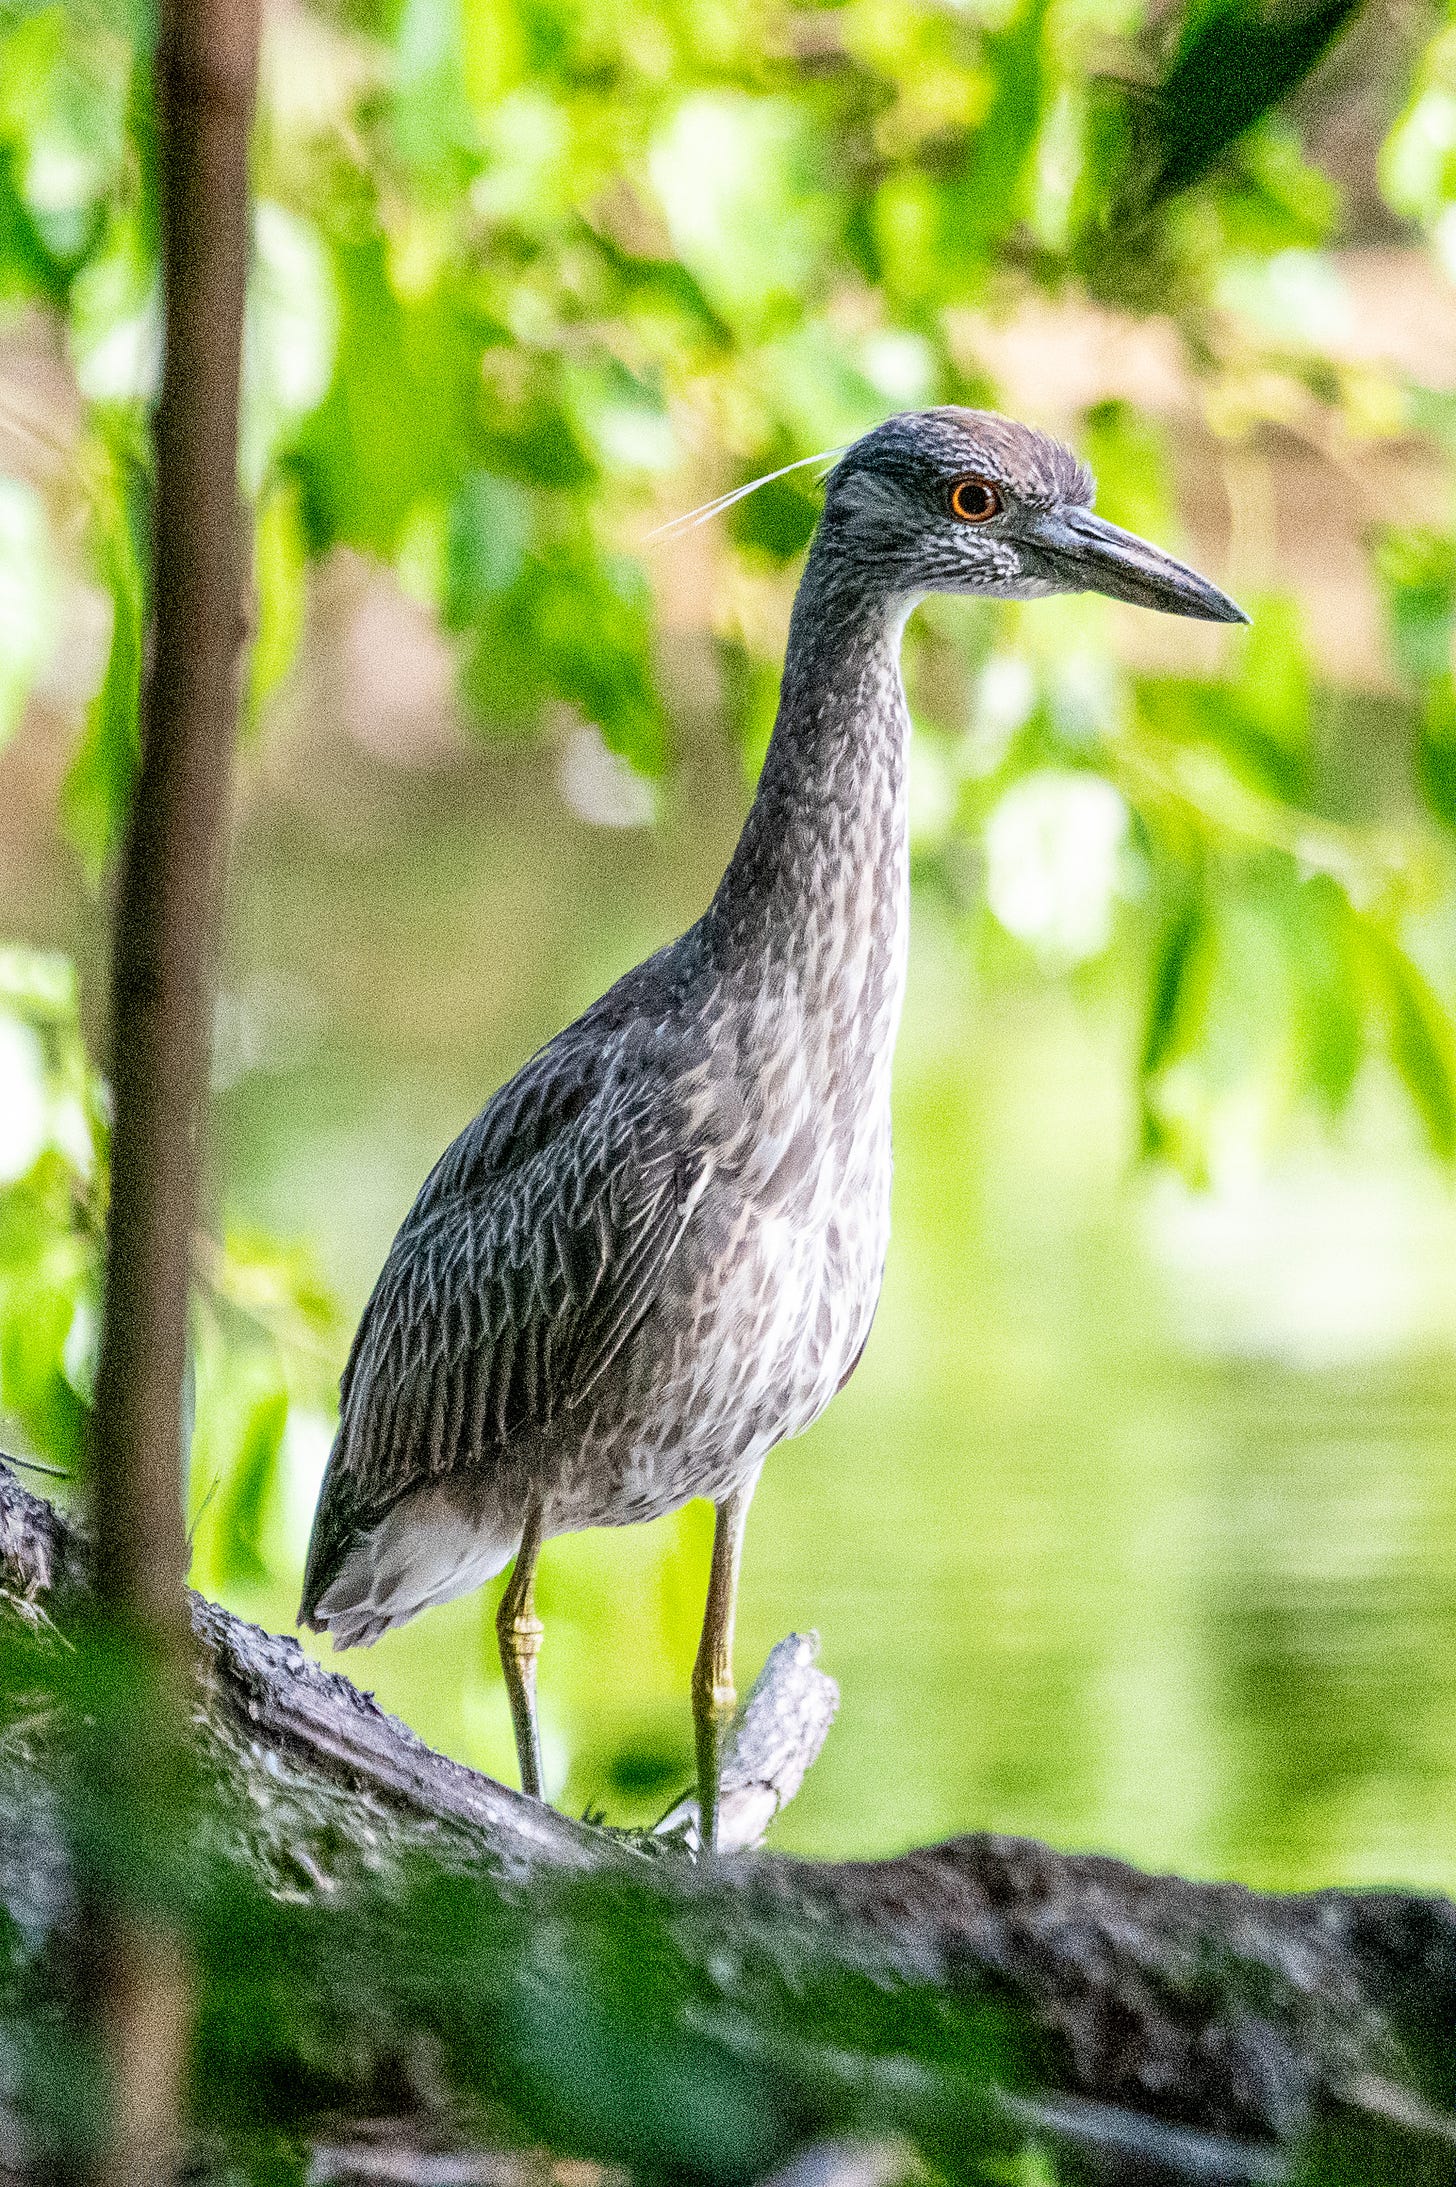 An immature yellow-crowned night heron, with thousand-yard stare and fat-dagger-shaped bill